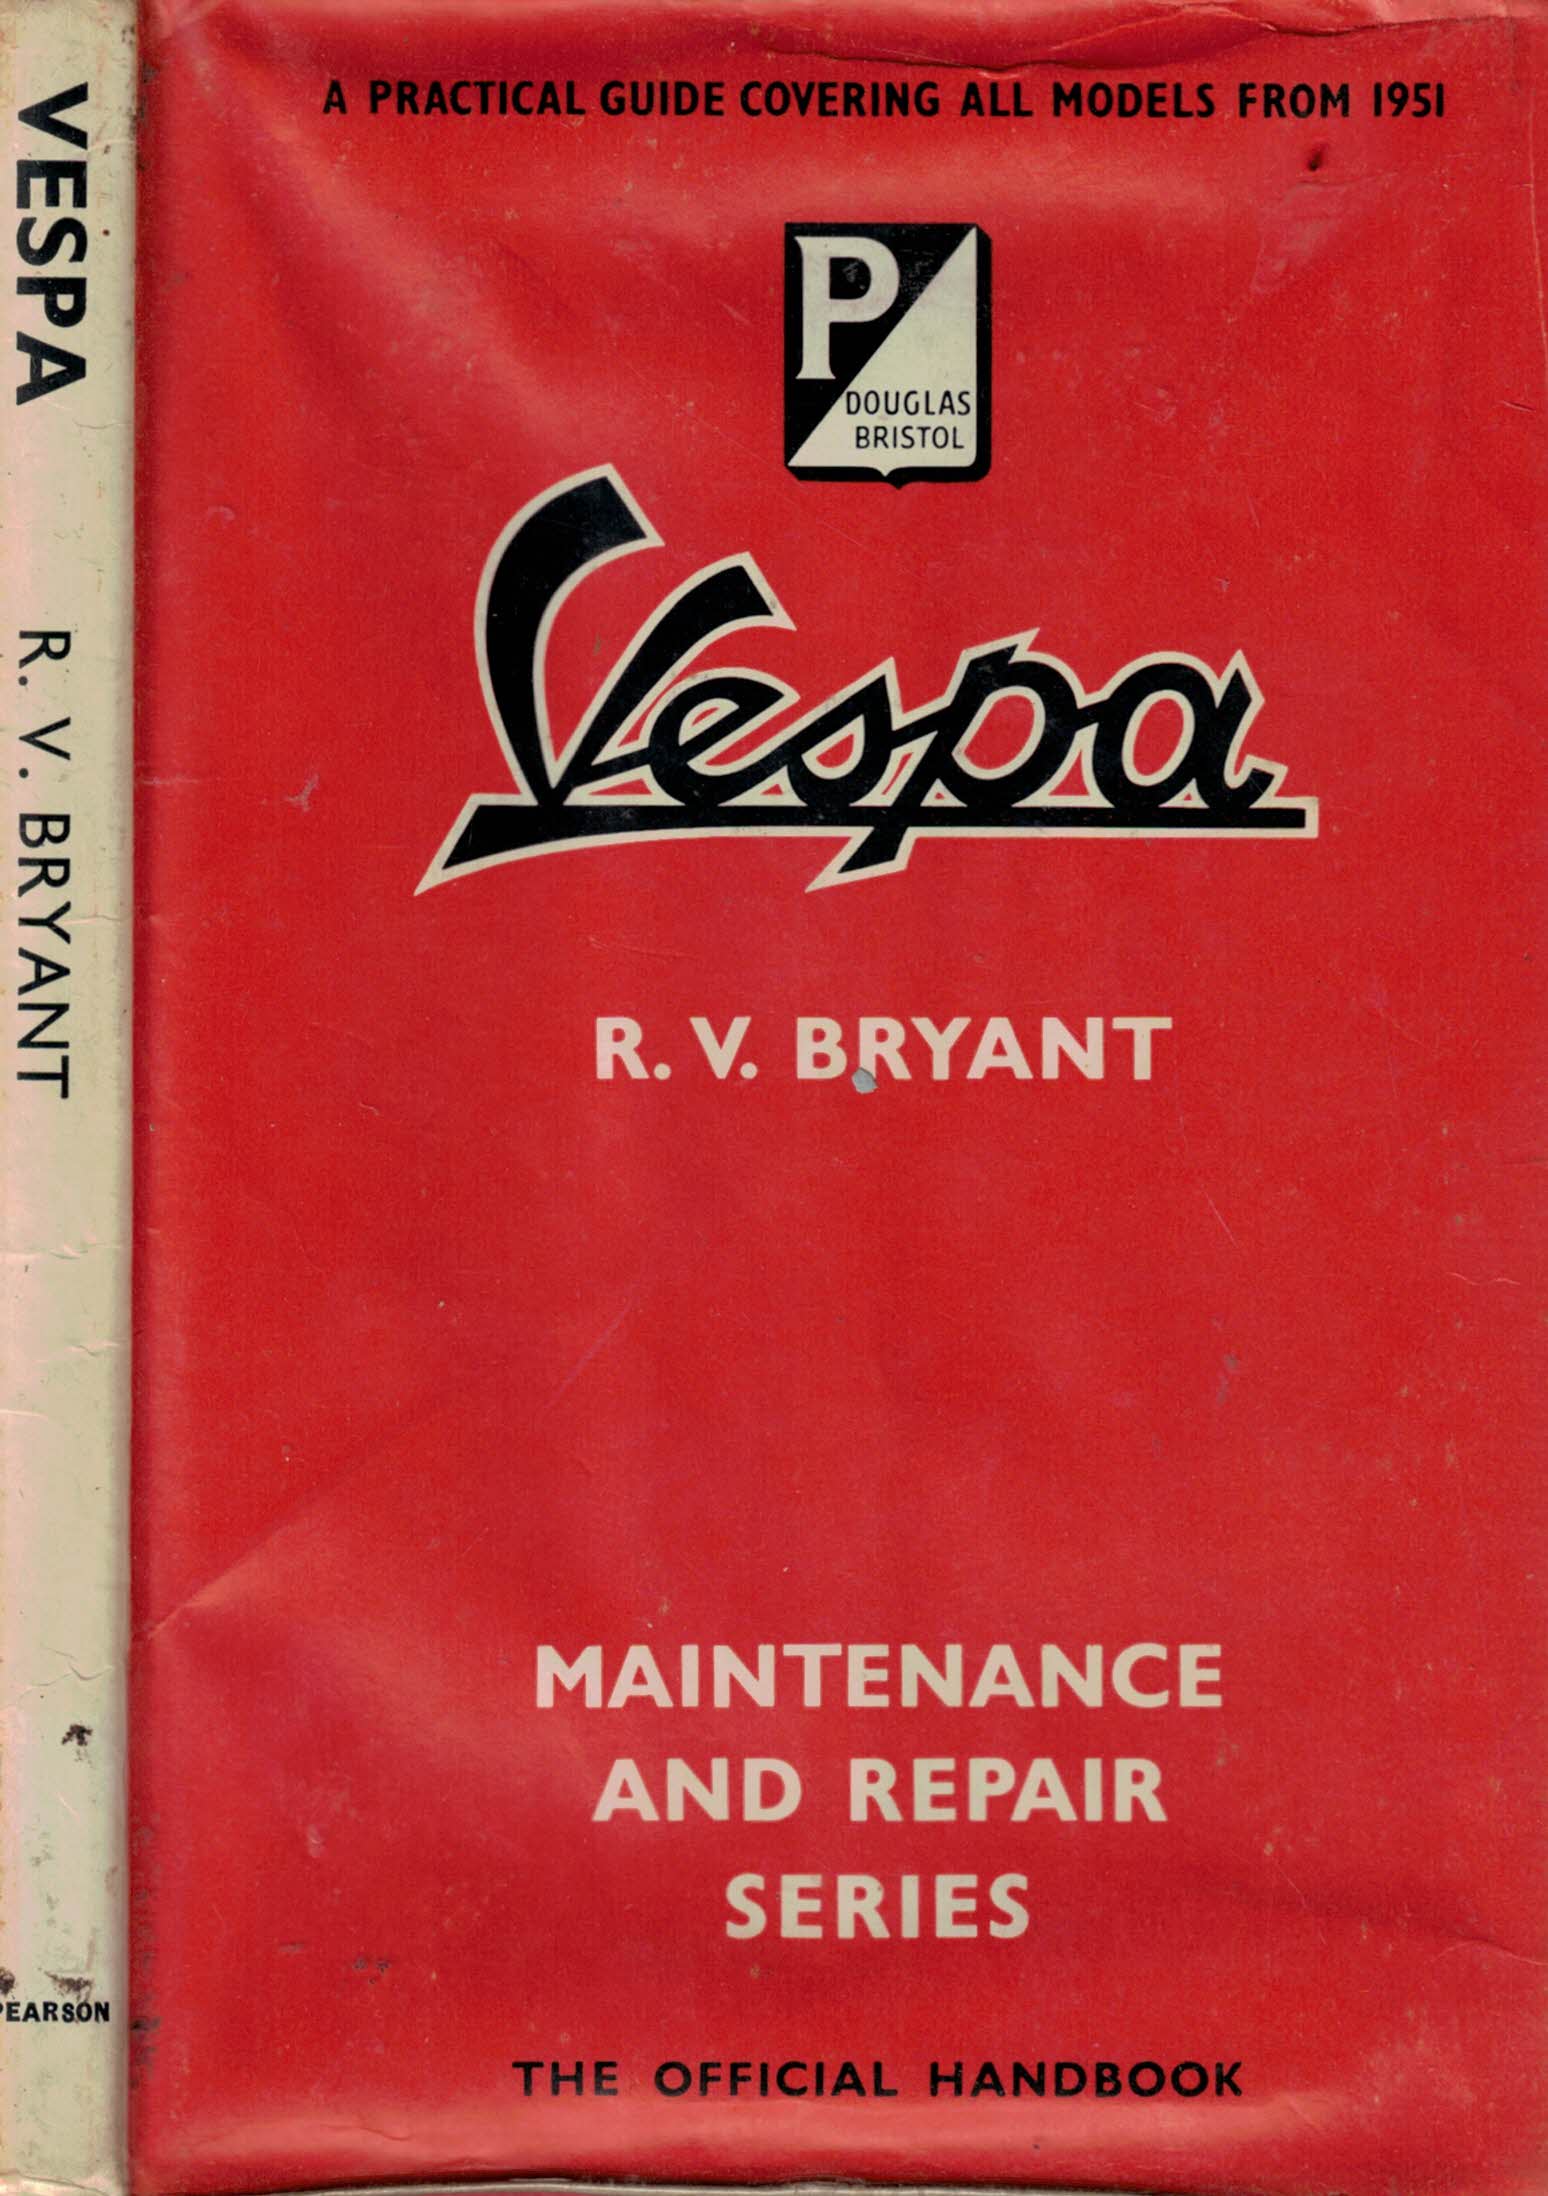 Vespa. A Practical Guide Covering all Models.